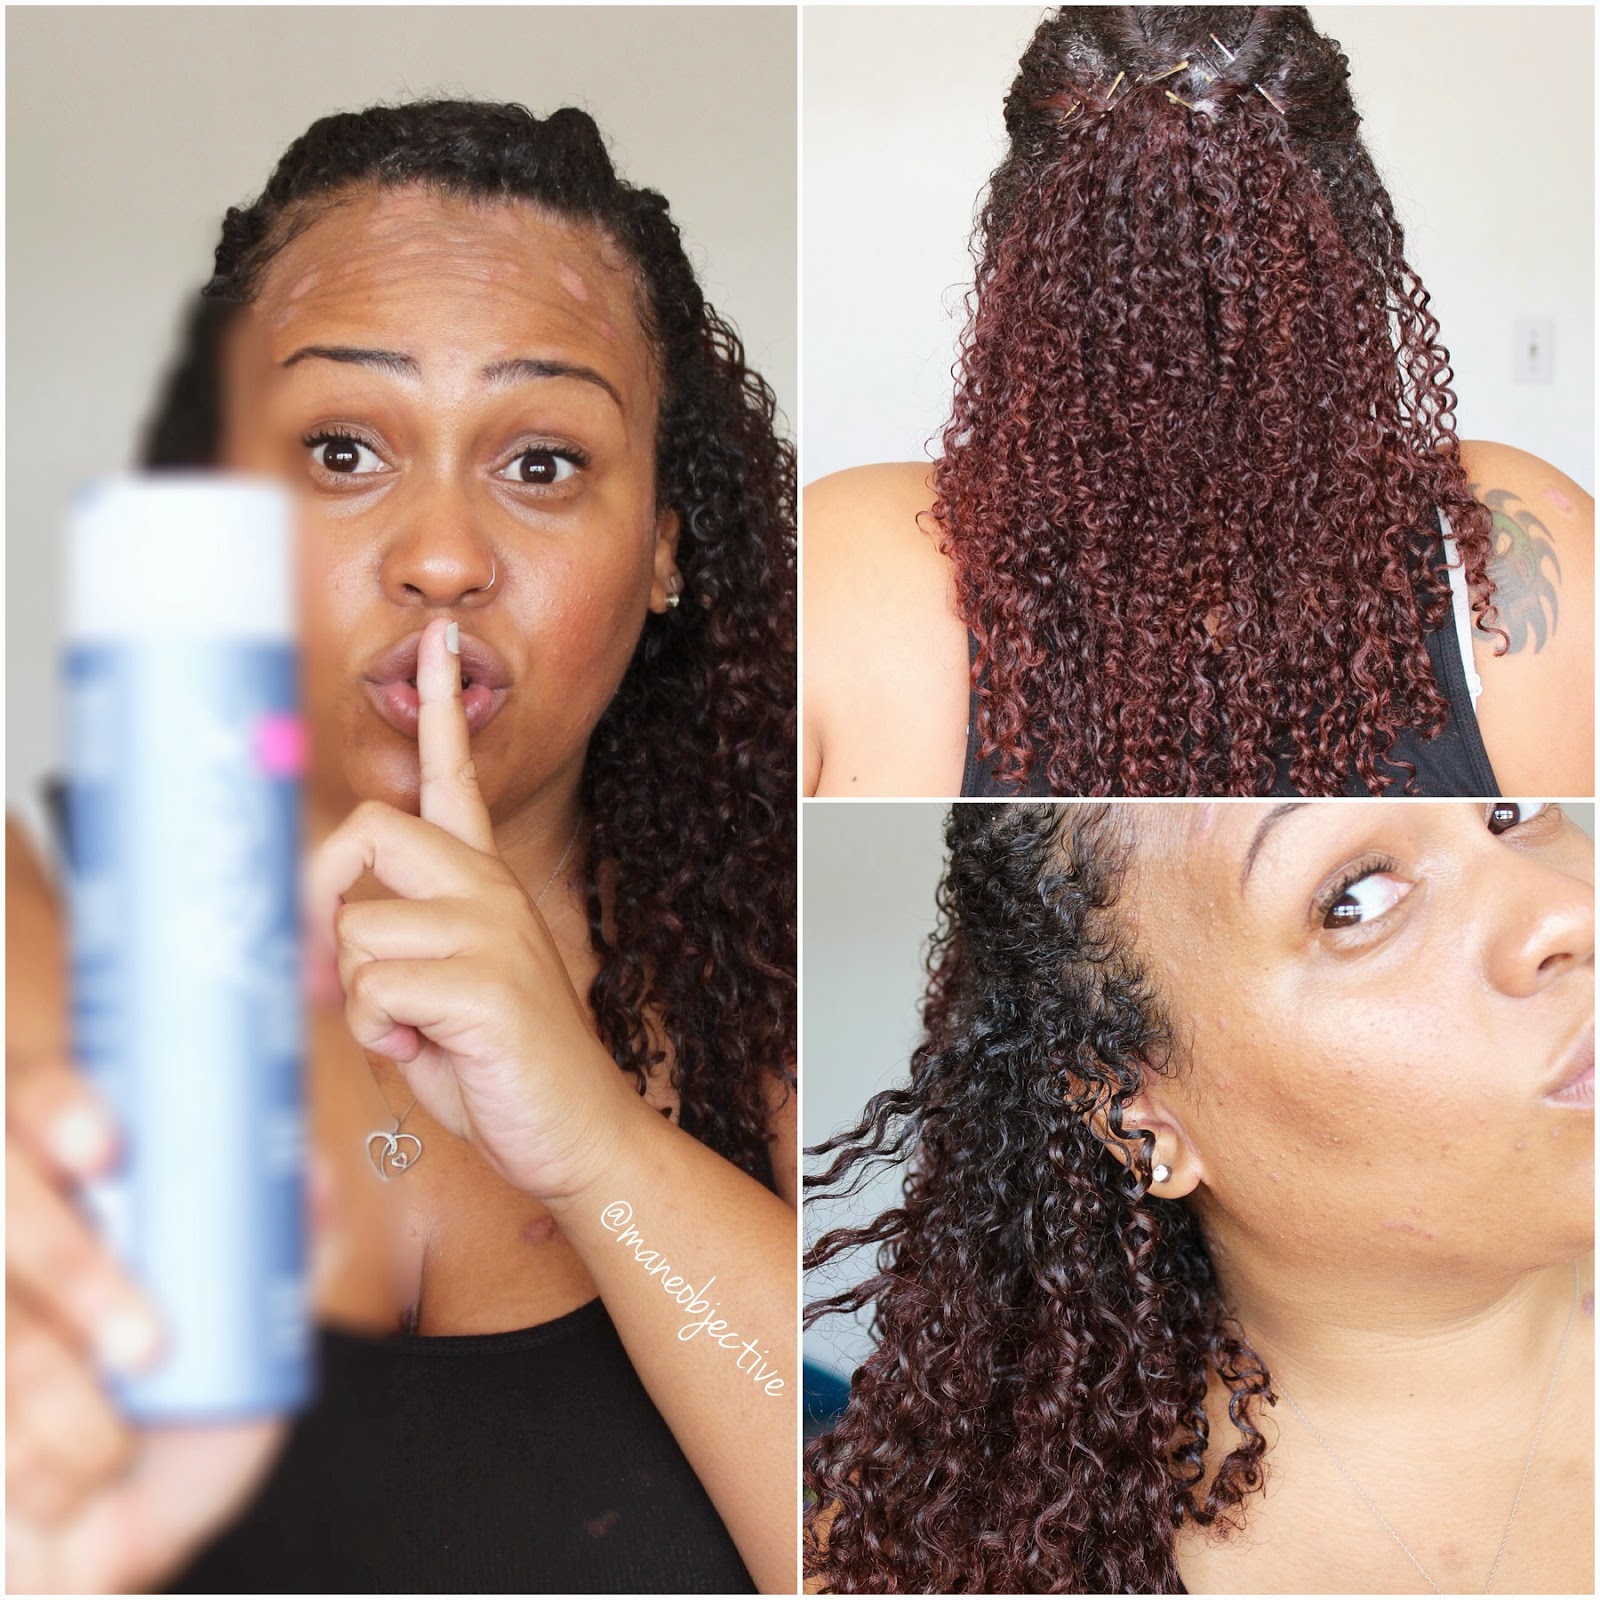 My New Secret Weapon in the Battle Against Dry Natural Hair: Roux Porosity Control Corrector & Conditioner Review